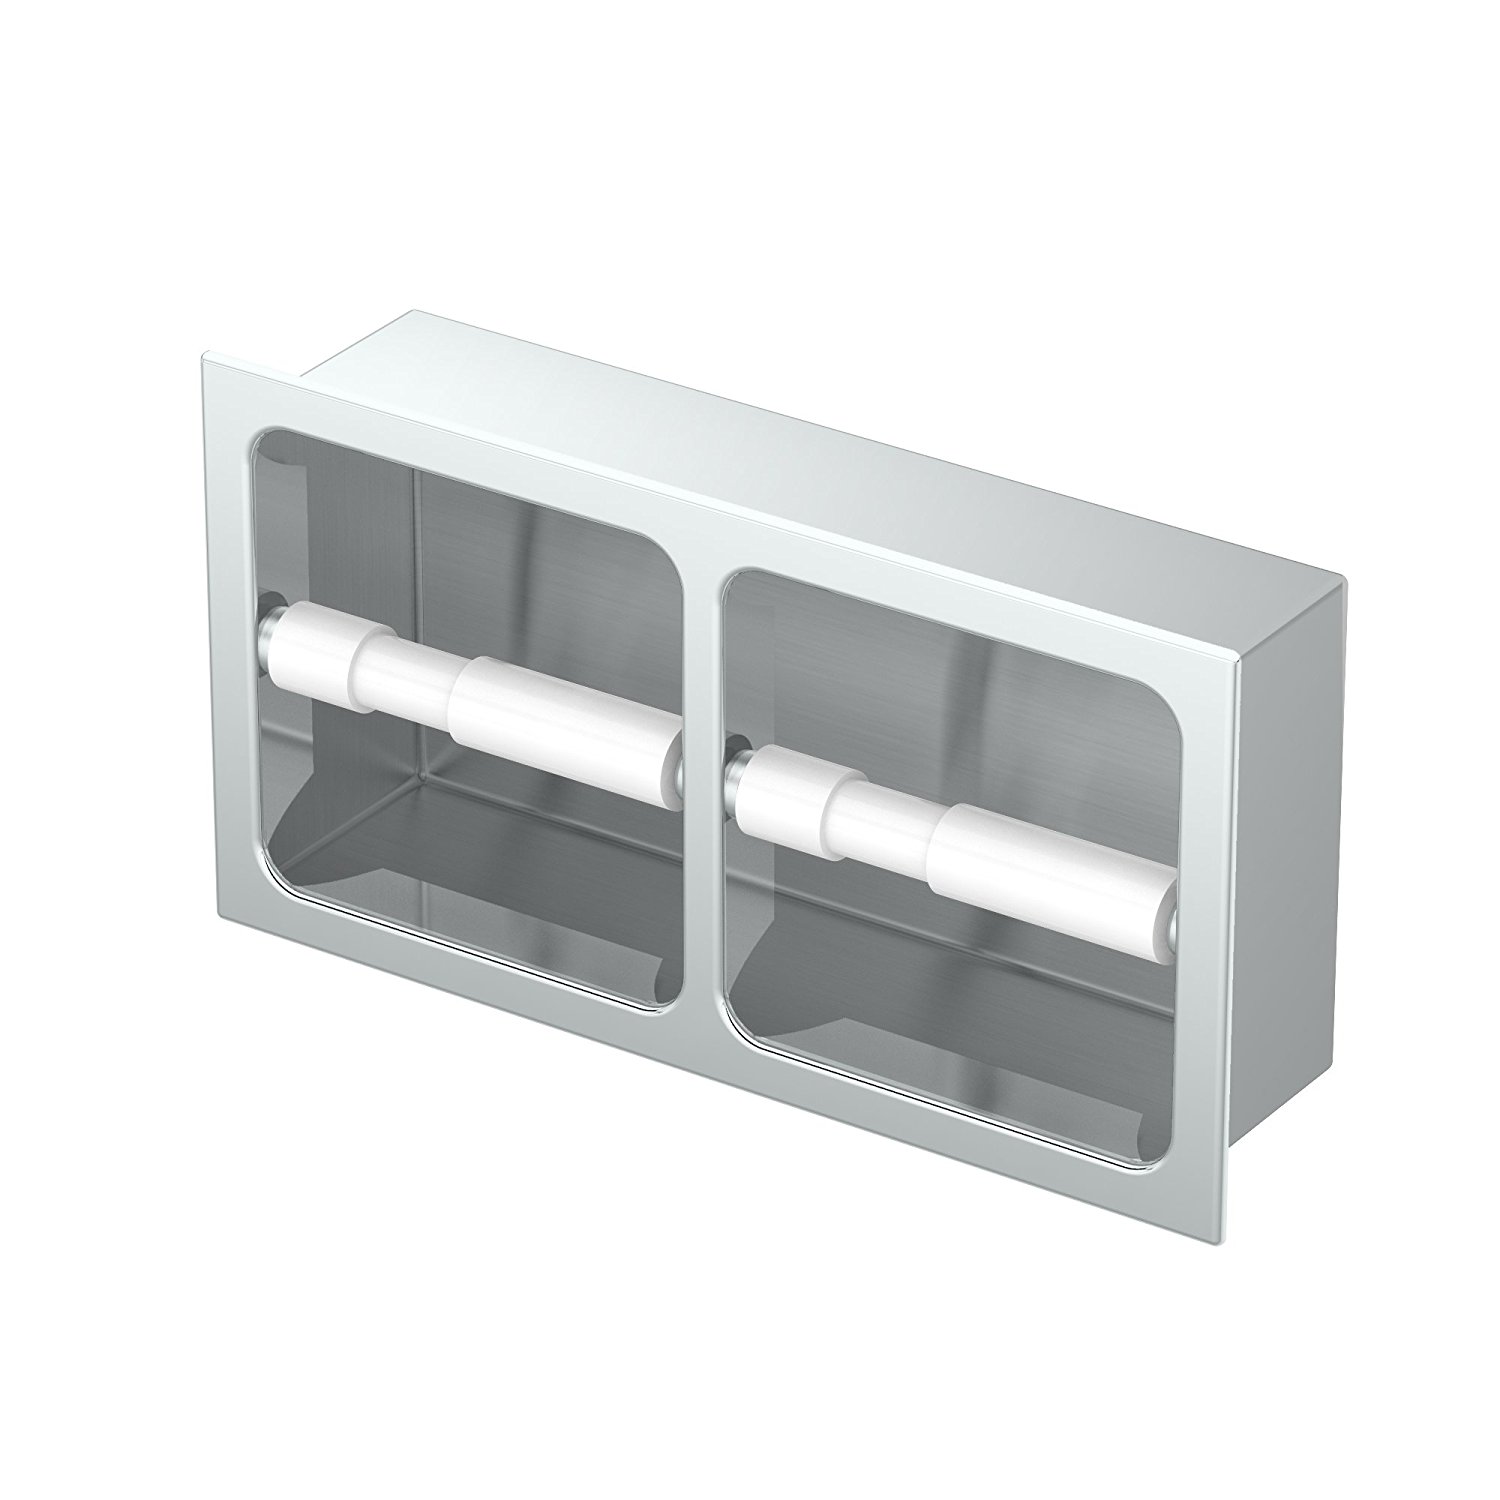 Gatco 782A Double Recessed Tissue Holder Chrome Doube Recessed Tissue Holder